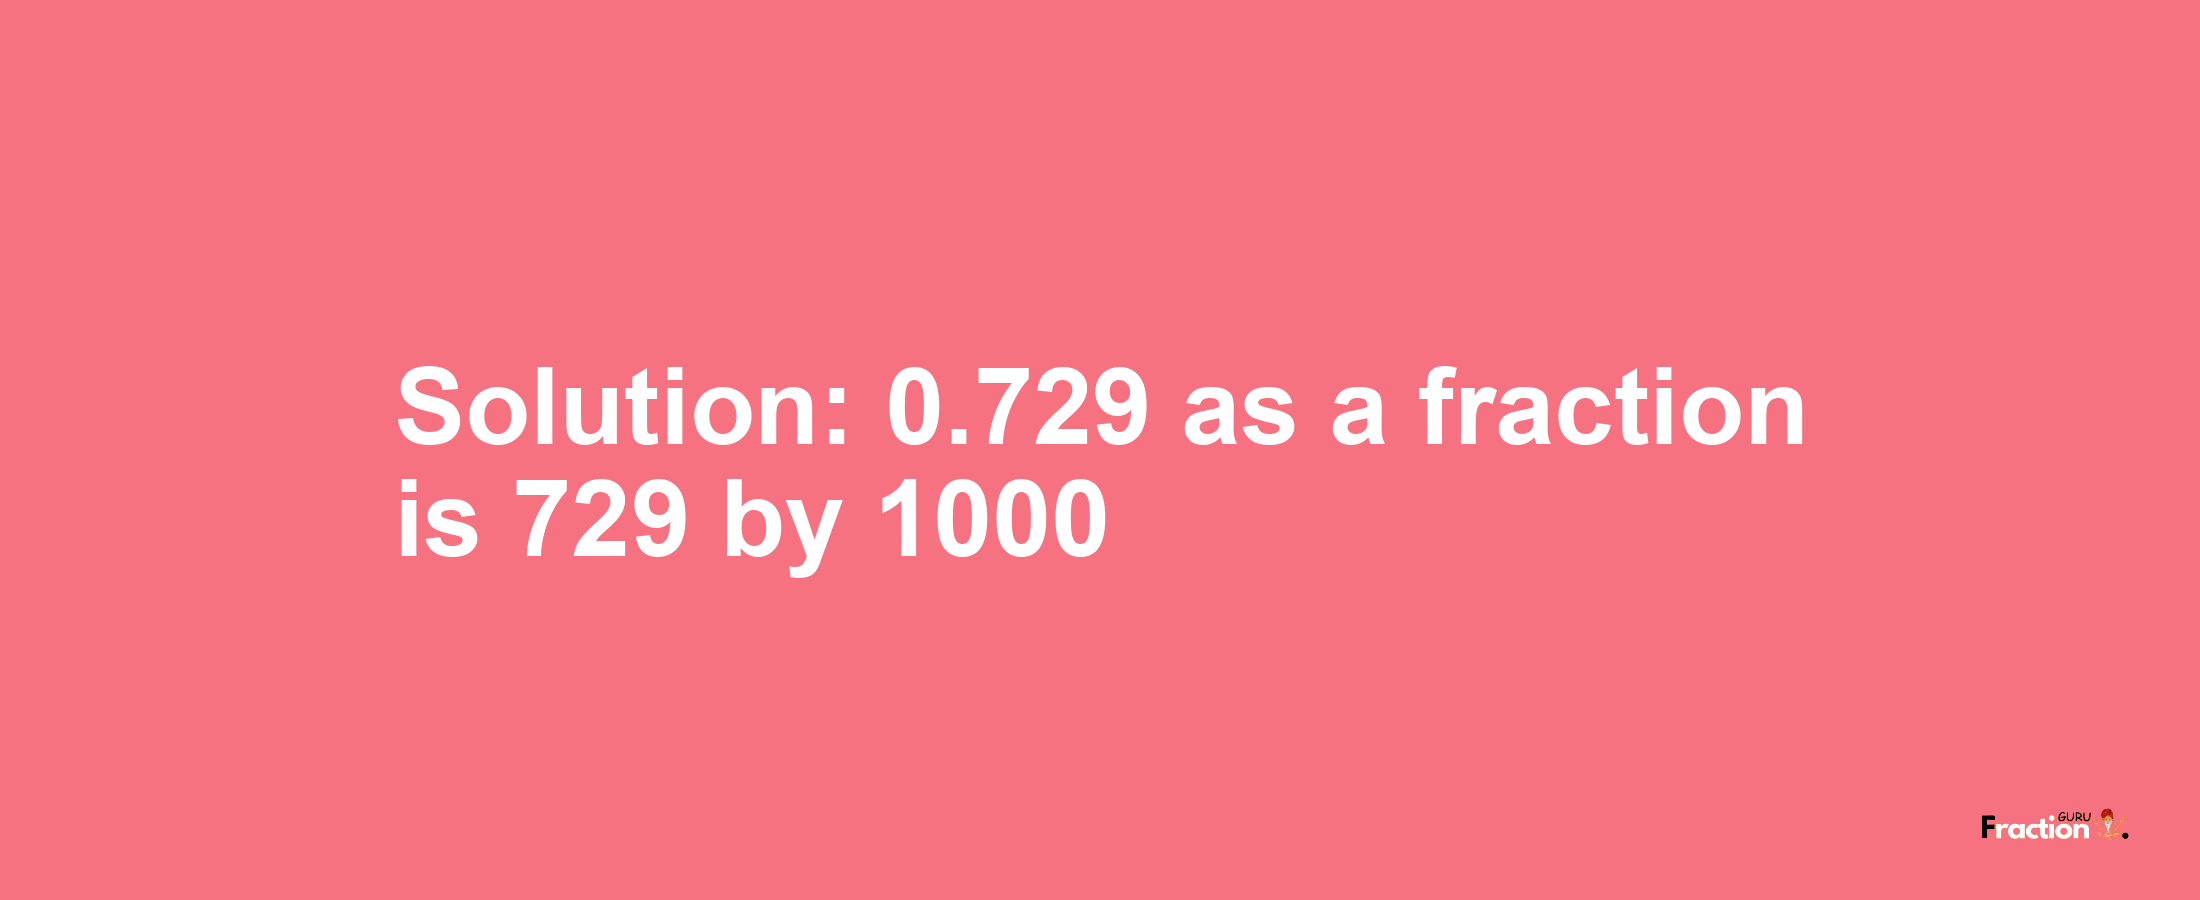 Solution:0.729 as a fraction is 729/1000